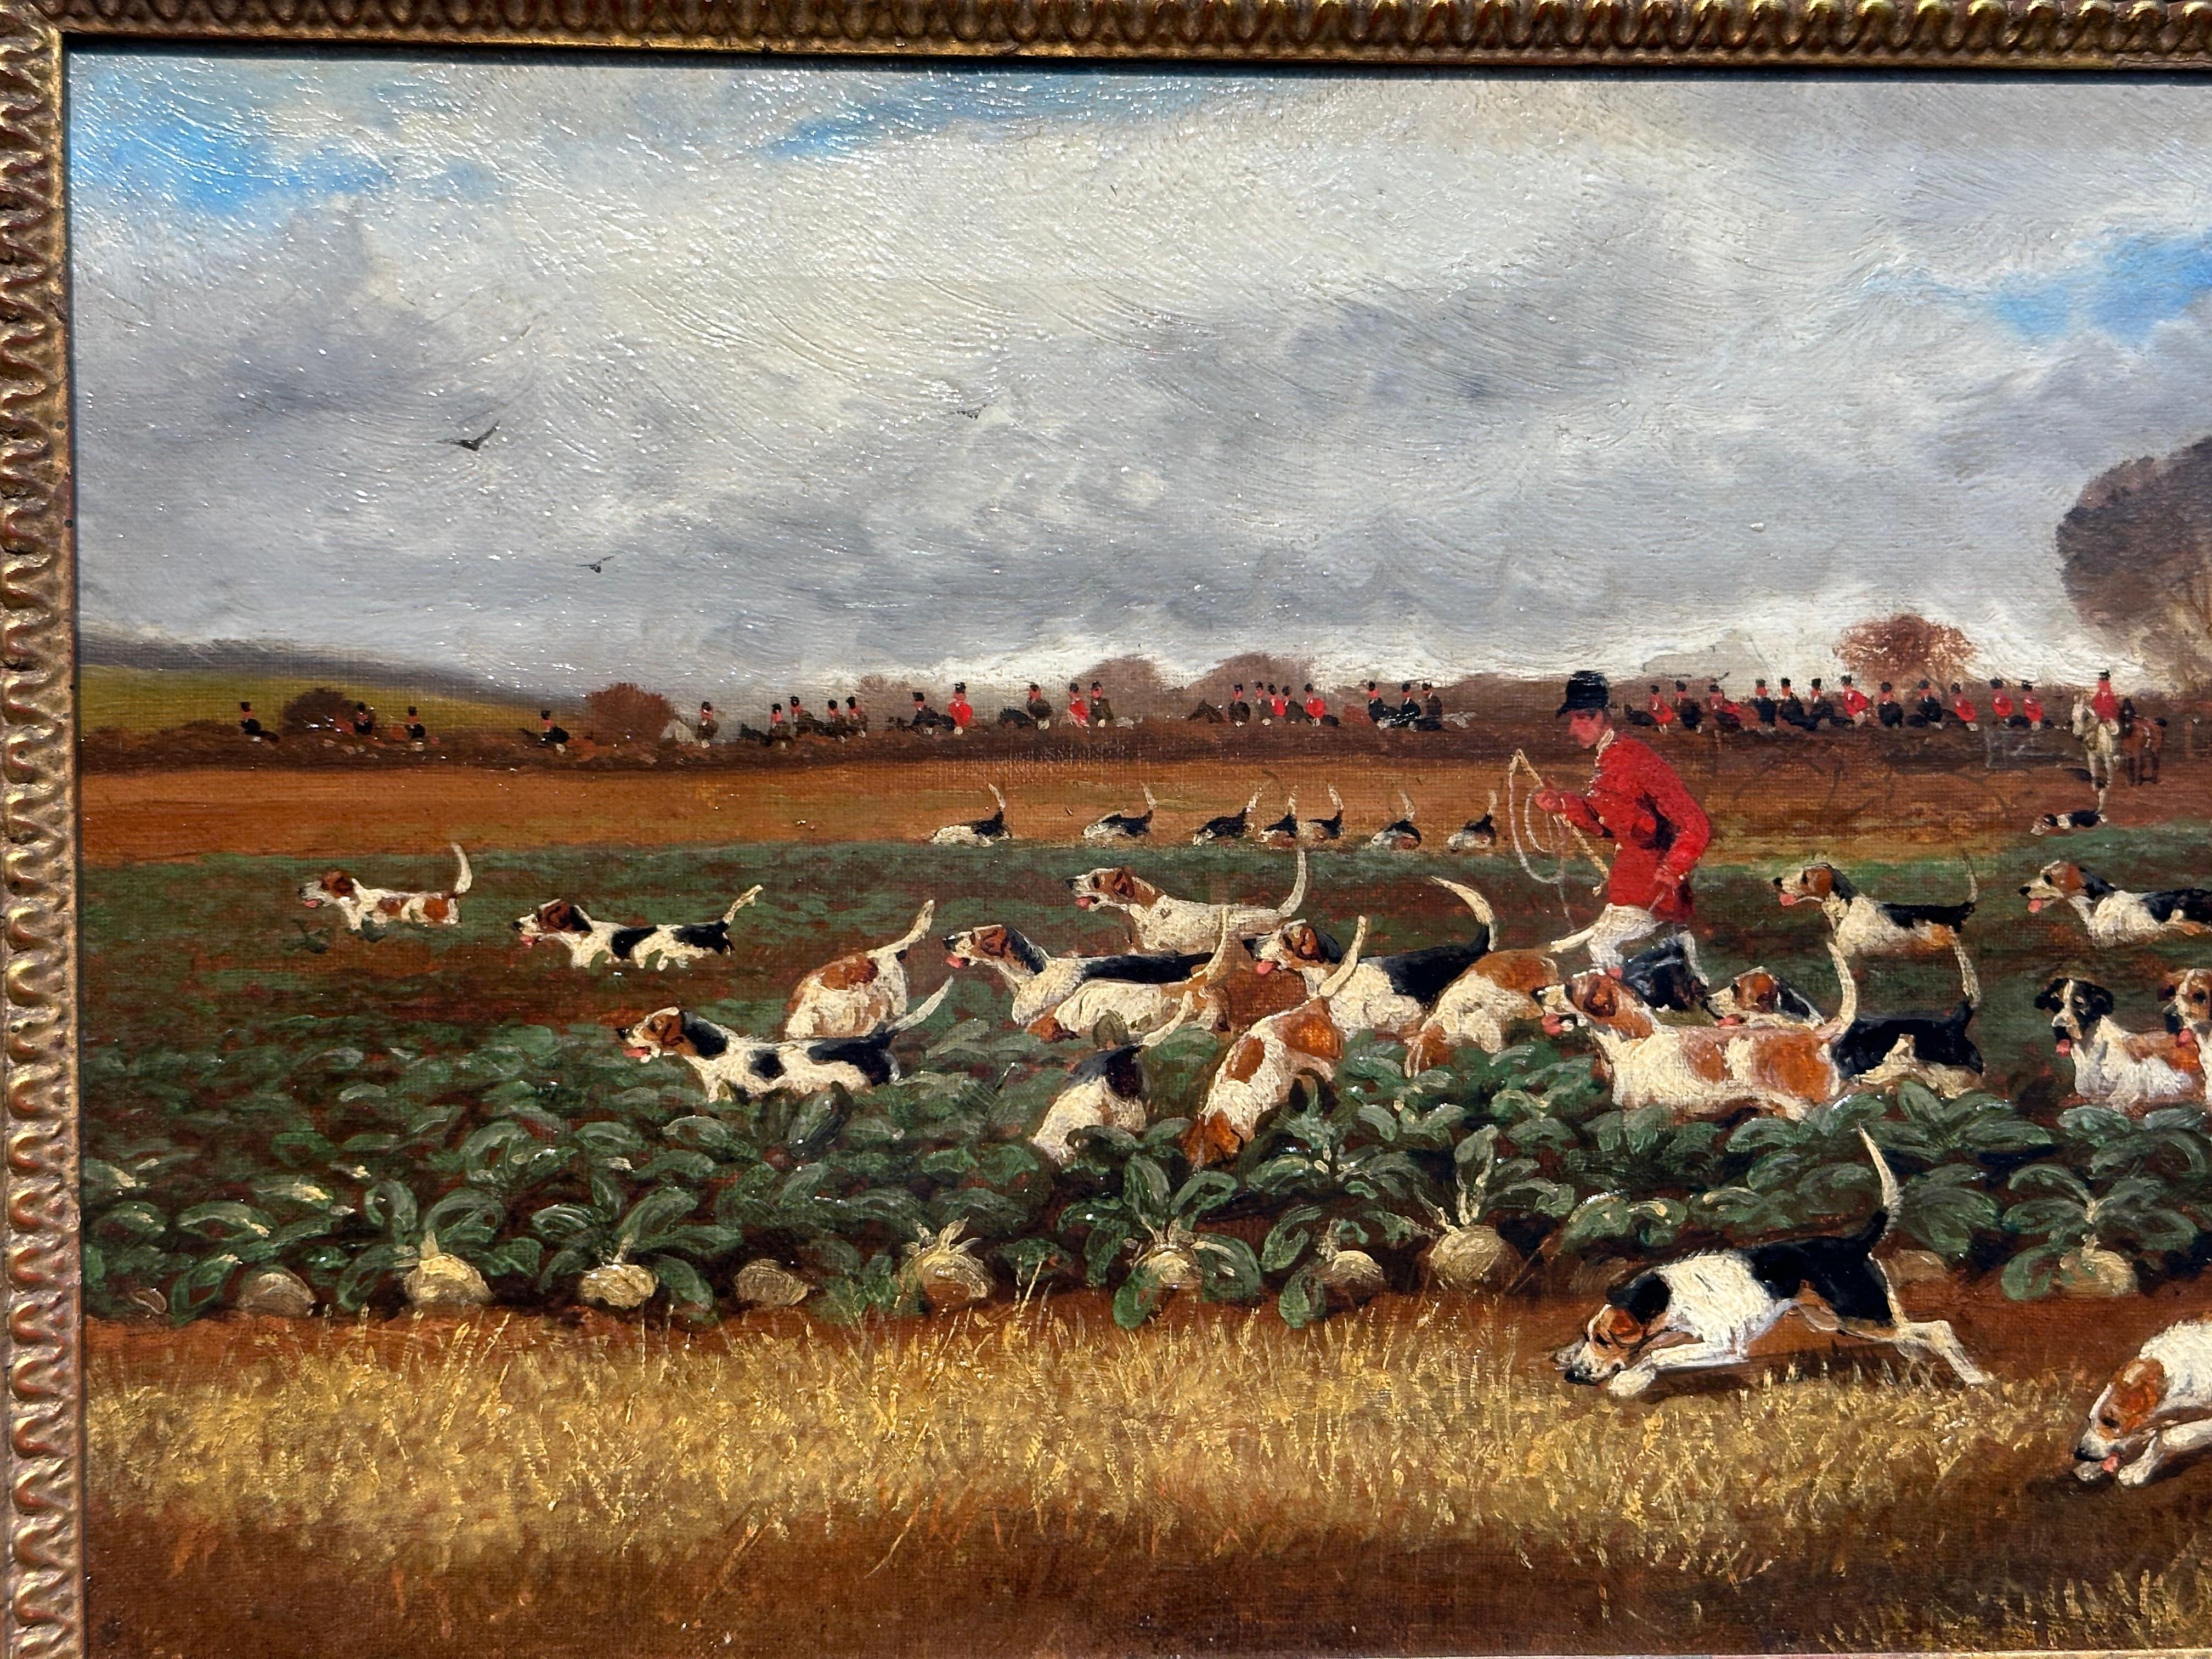 19th century English Fox hunters with hounds in a turnip patch landscape. - Victorian Painting by Sylvester Martin